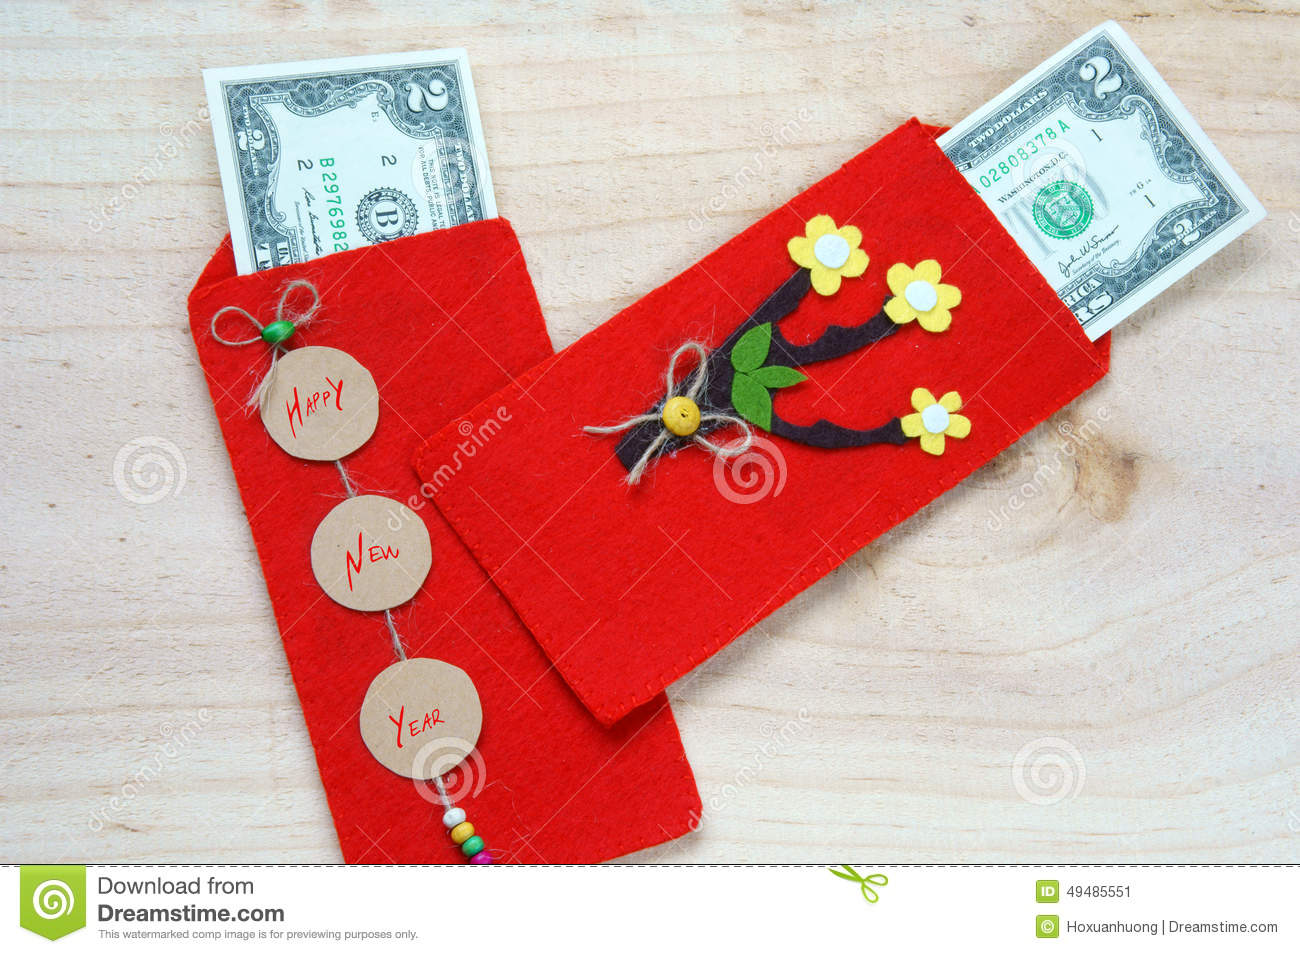 Of Vietnamese On Tet Is Lucky Money A Vietnam Traditional Culture